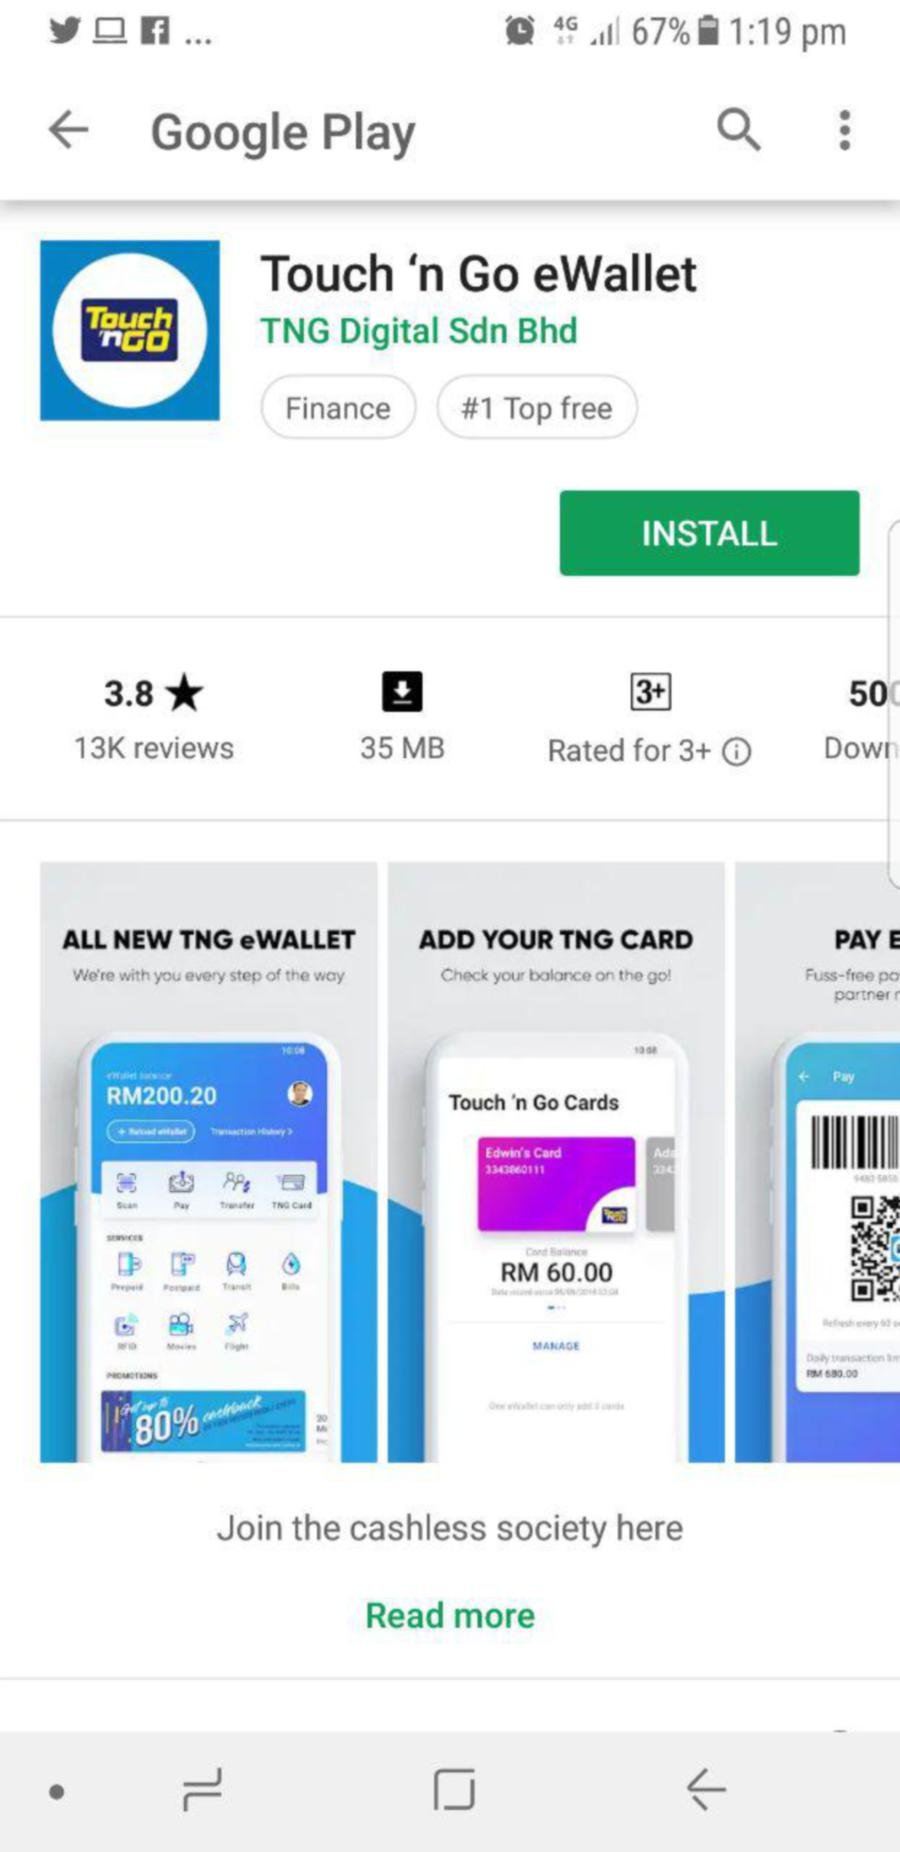 Not satisfied with Touch 'n Go mobile app | New Straits ...